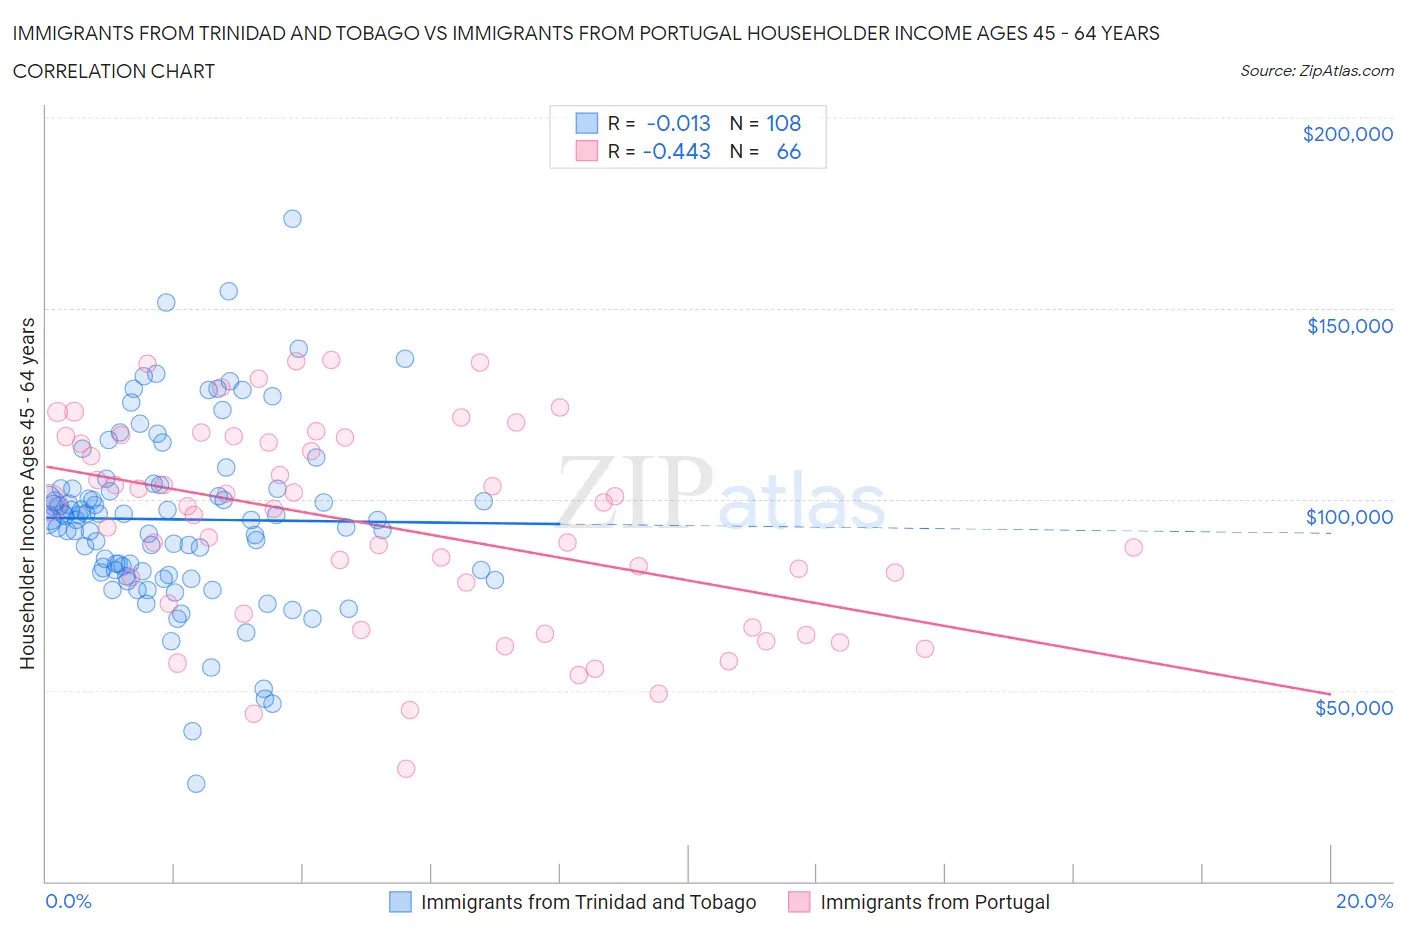 Immigrants from Trinidad and Tobago vs Immigrants from Portugal Householder Income Ages 45 - 64 years